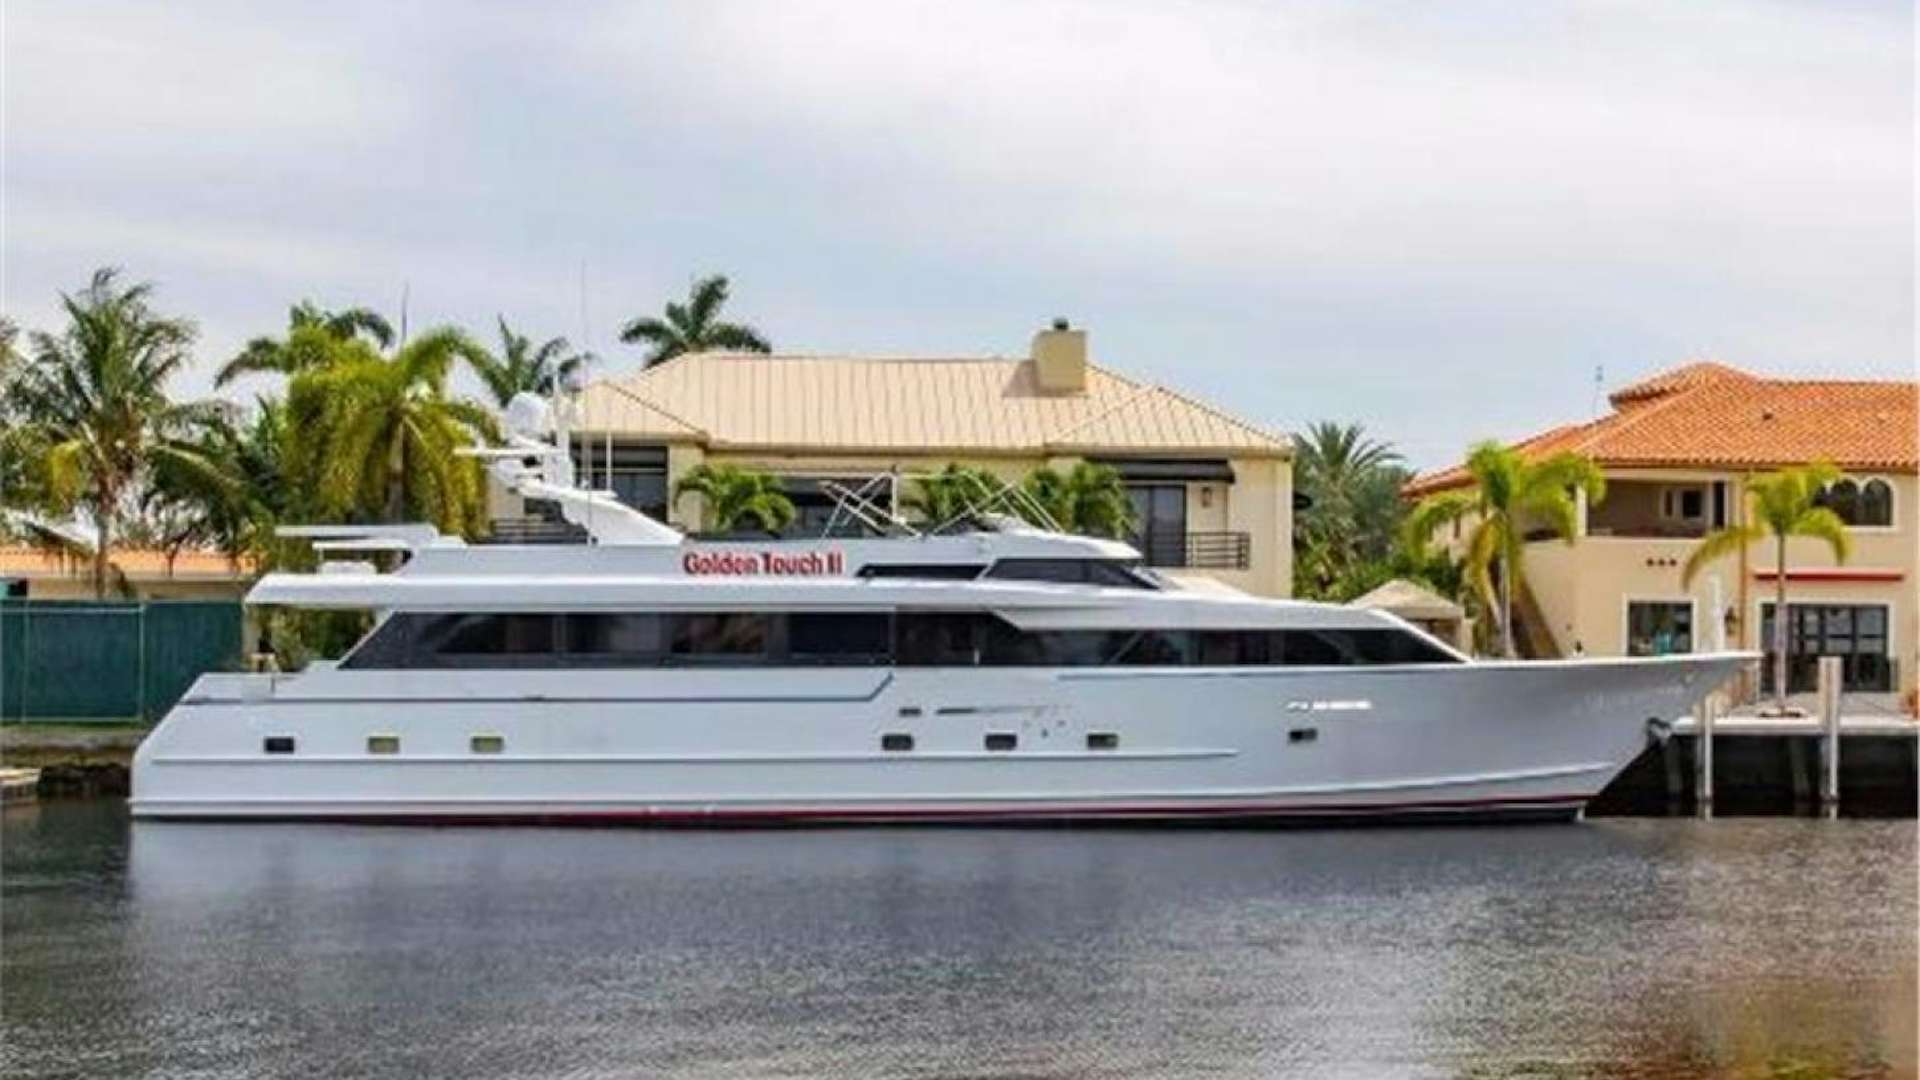 Watch Video for GOLDEN TOUCH Yacht for Sale